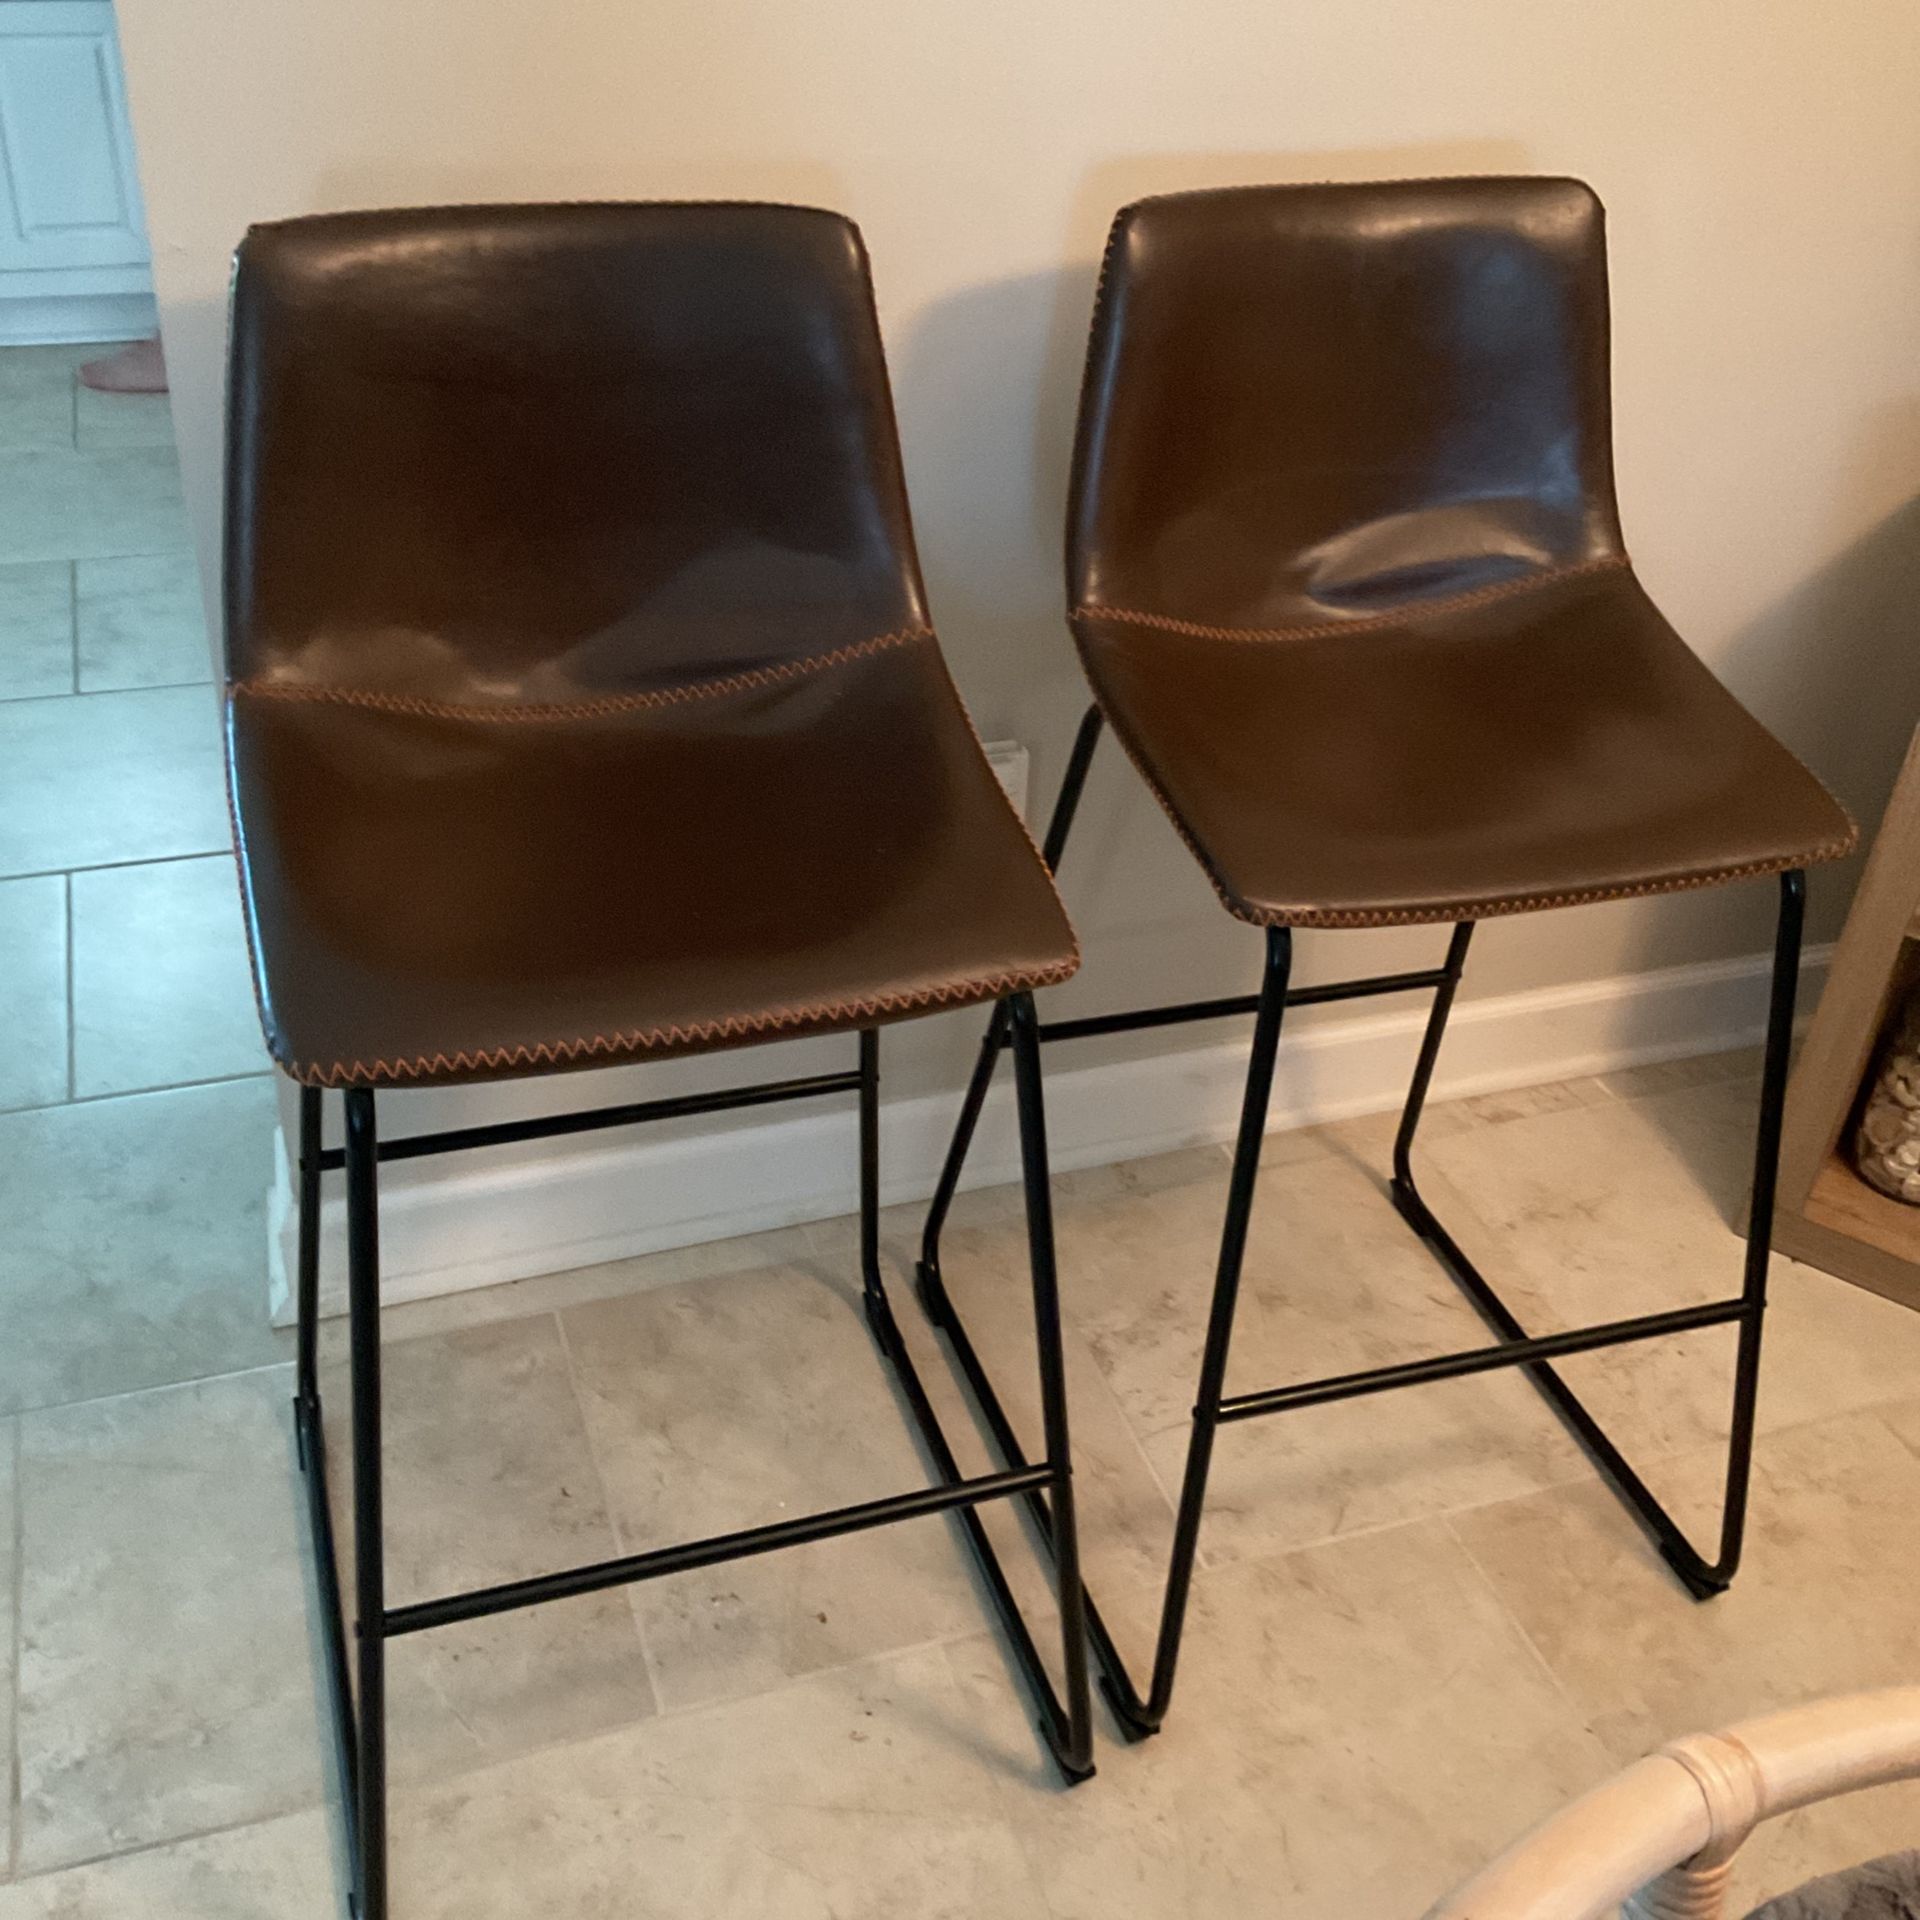 Faux Leather Stools With Edging (set Of 2)